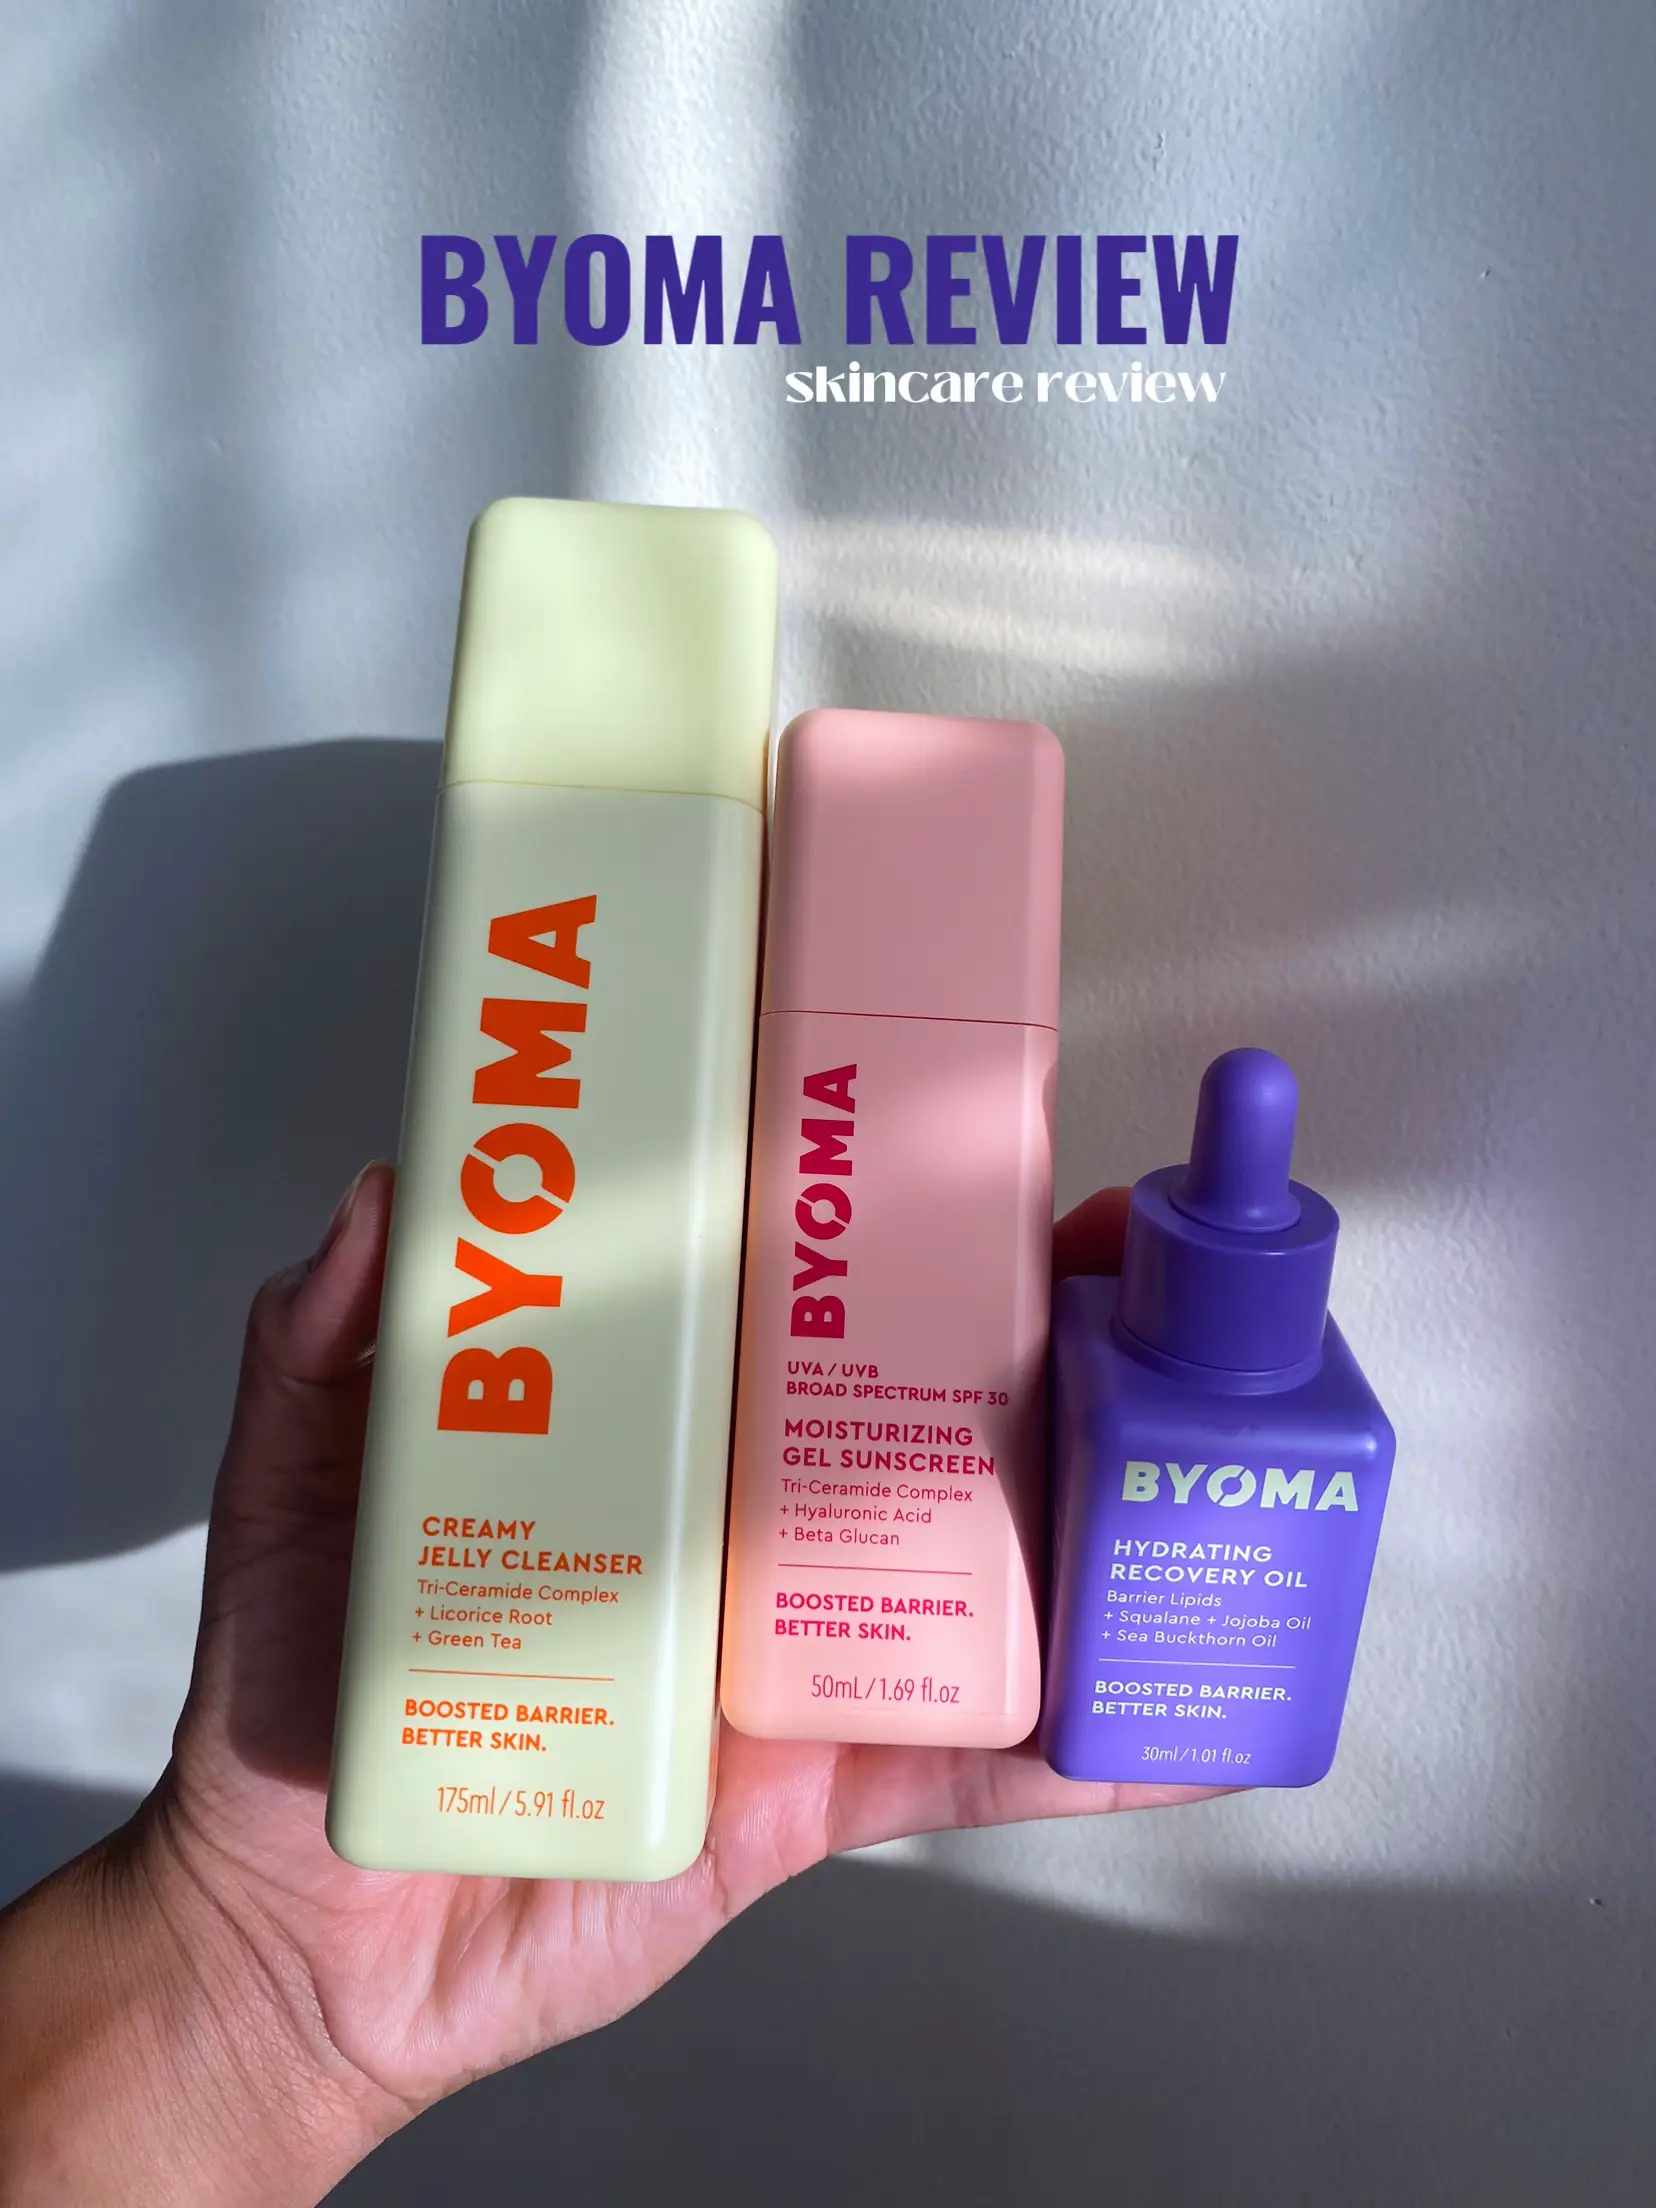 BYOMA® Skin Barrier Boosting Skin Care Products